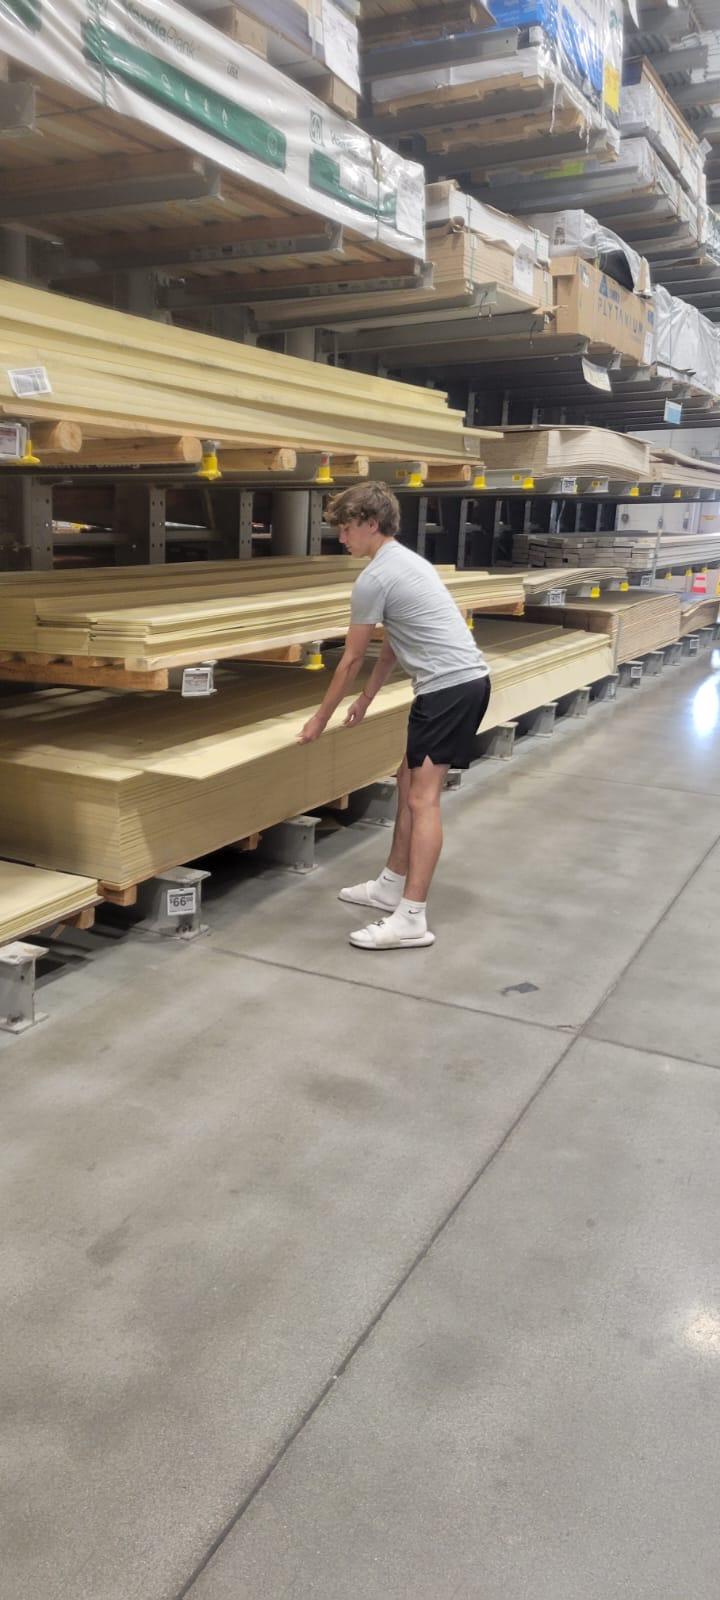 Getting the supplies for Lowes.jpg